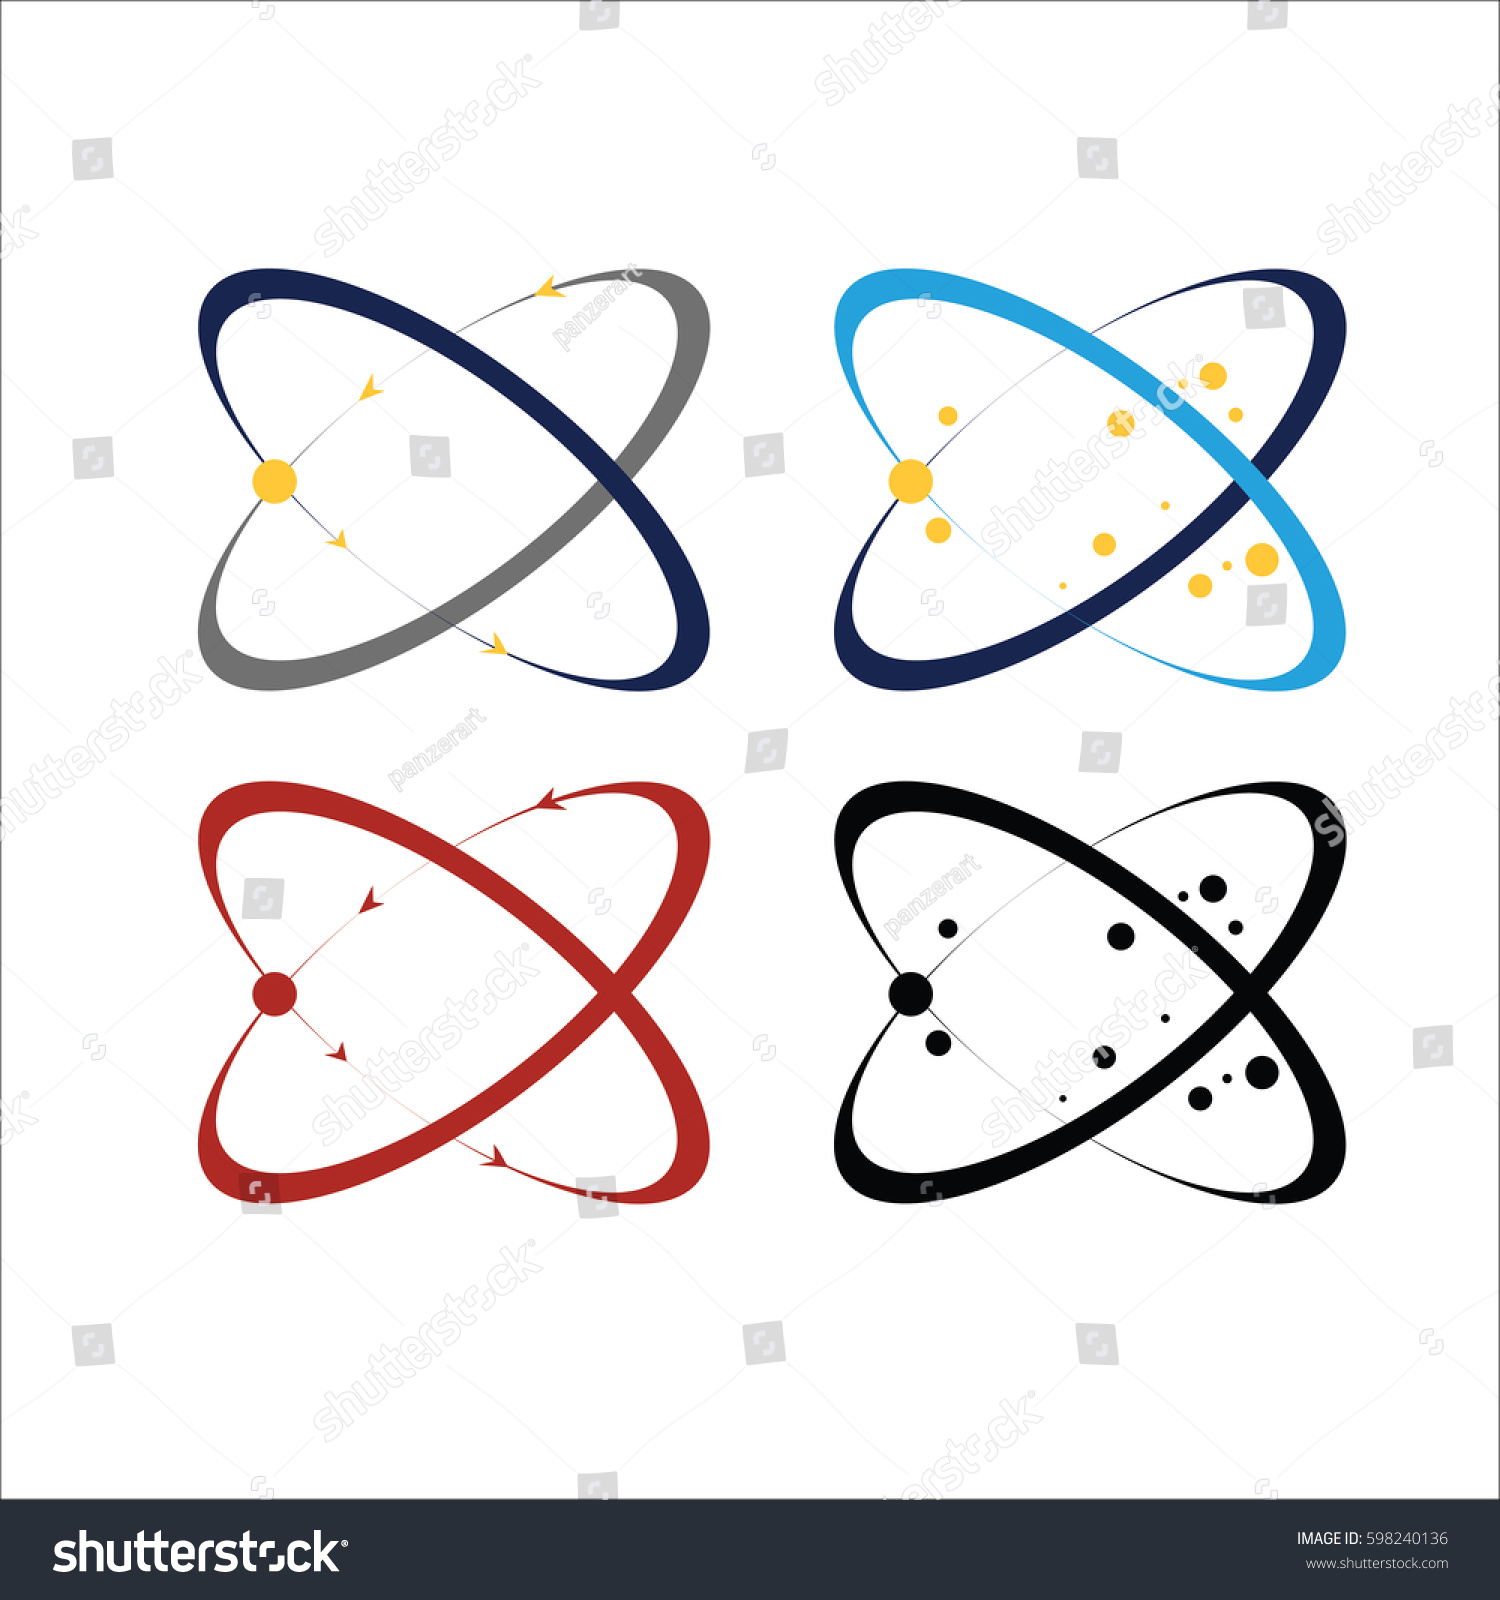 Chemical Reaction Vector Stock Vector (Royalty Free) 598240136 ...